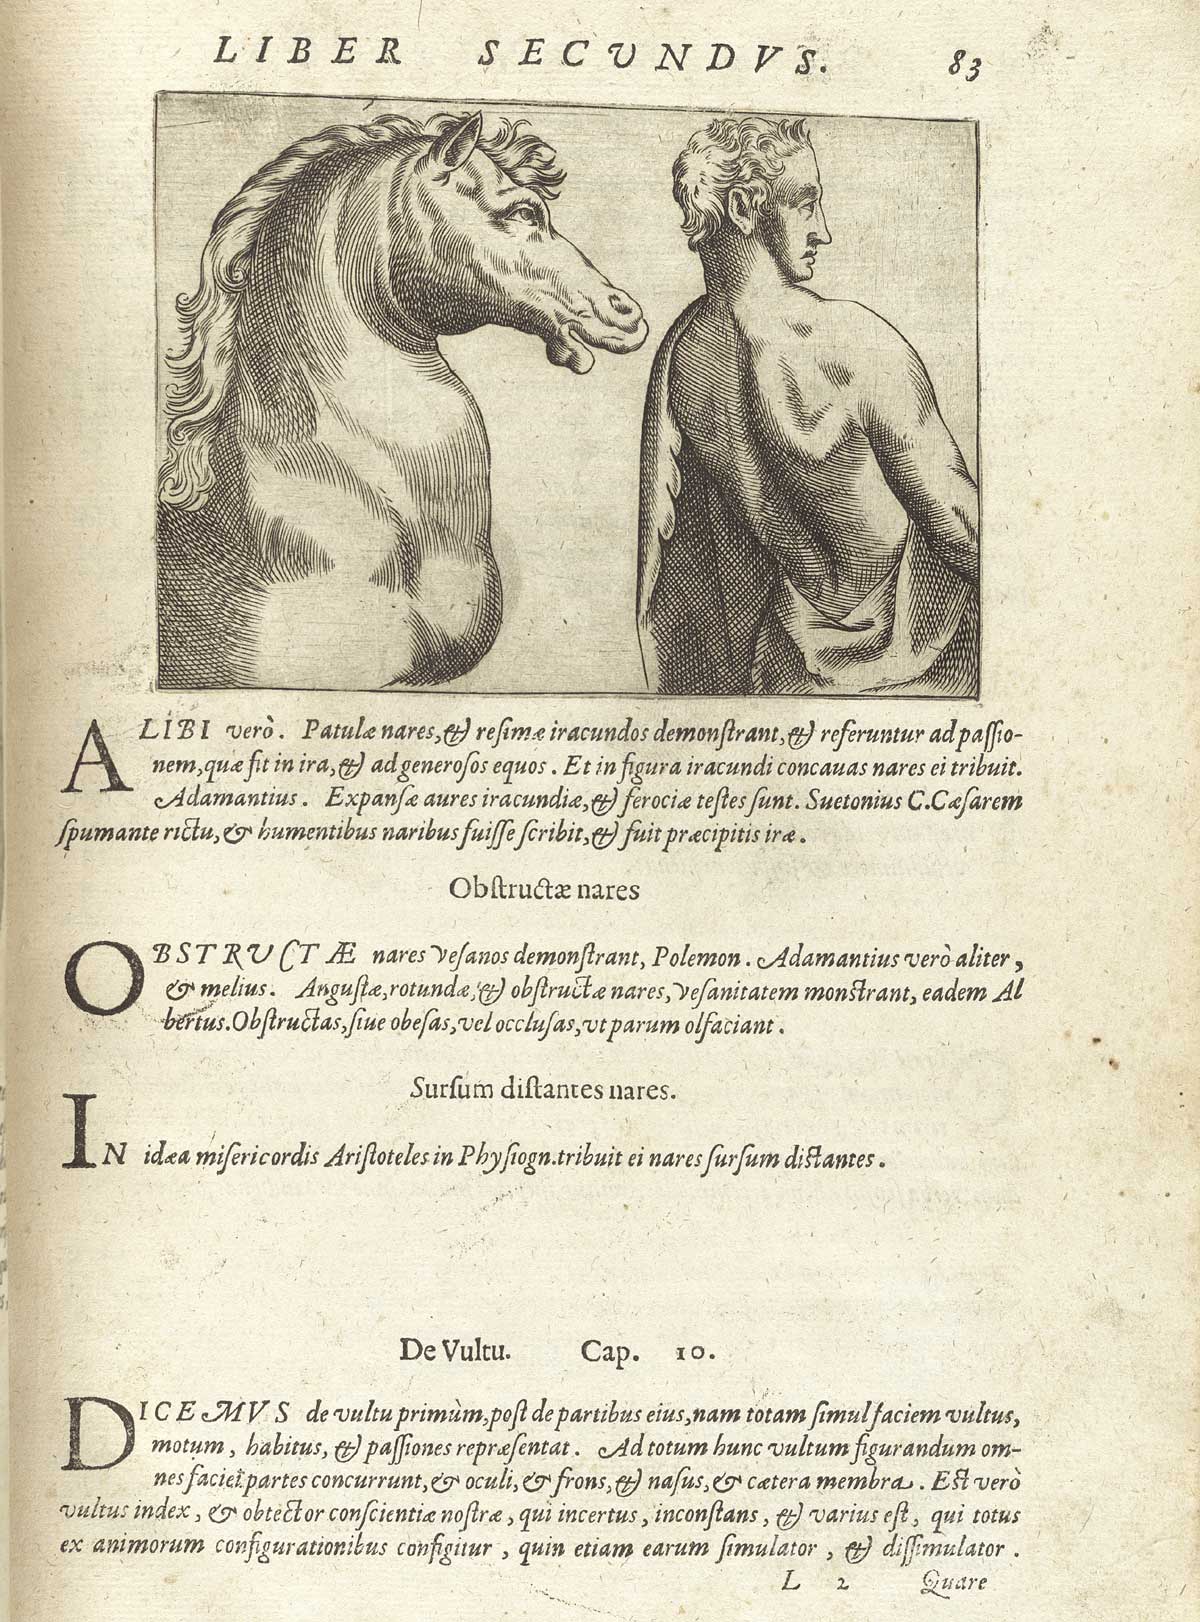 Page 83 of Giambattista della Porta's De humana physiognomonia libri IIII, featuring the head and shoulders right side view of a horse and the back of a man wearing a robe.